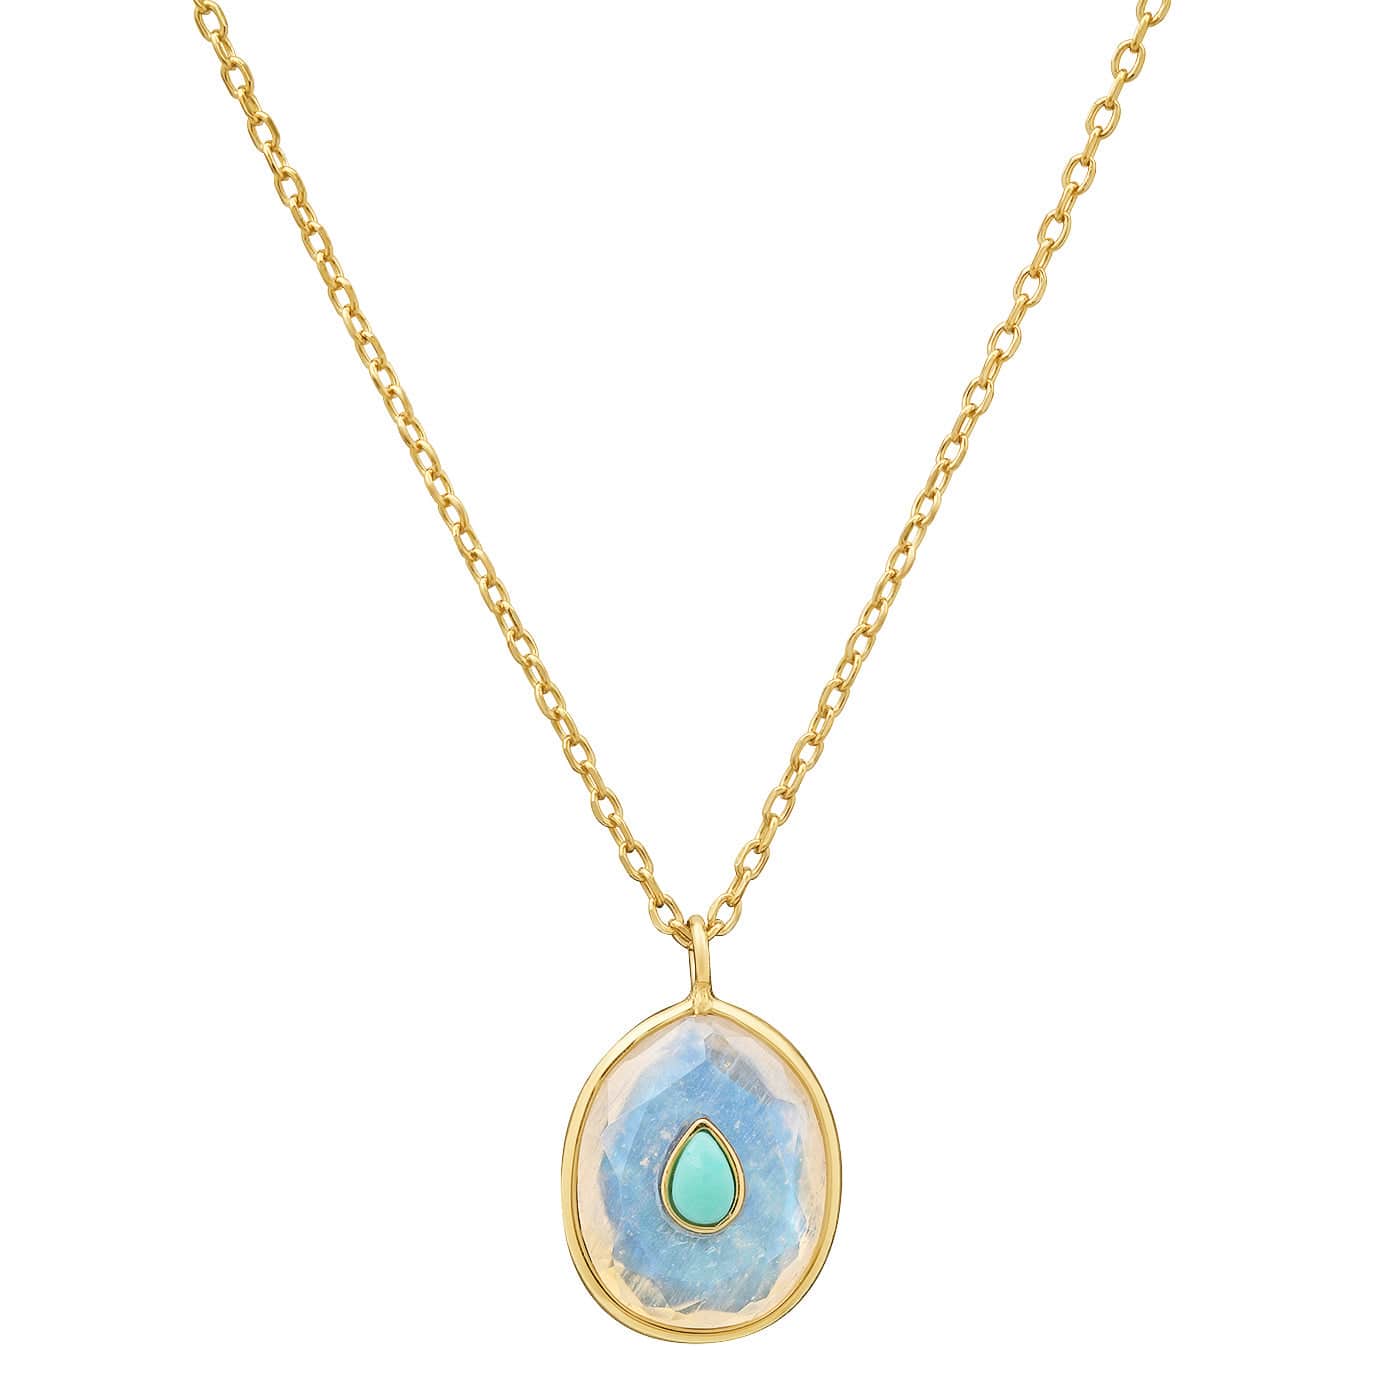 TAI JEWELRY Pearl and Opal Oval Pendant Necklace